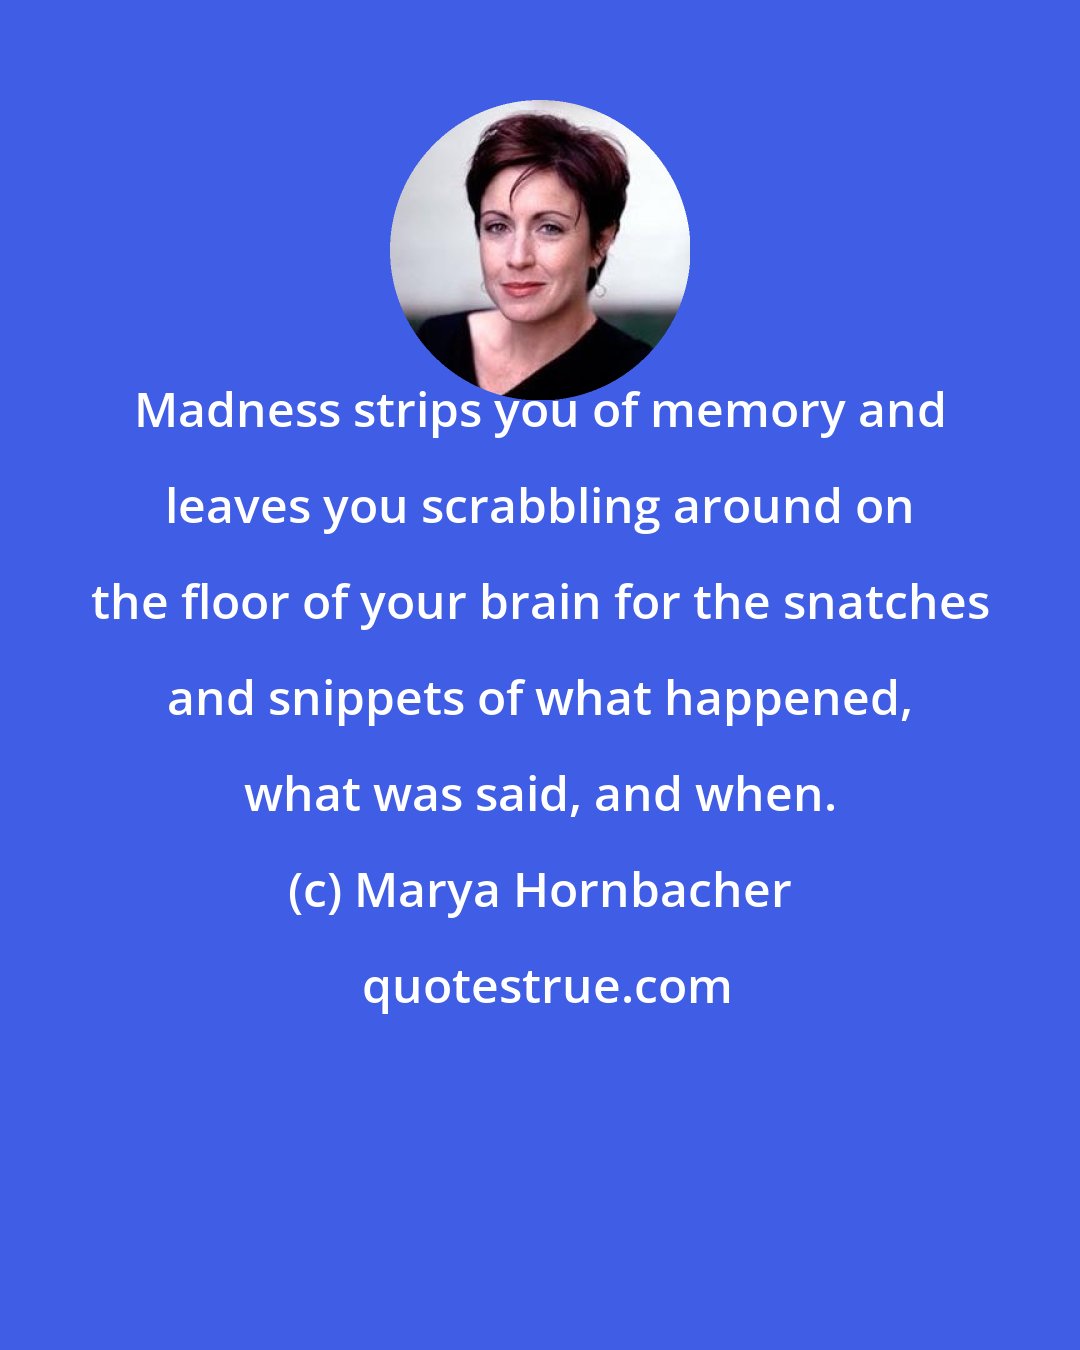 Marya Hornbacher: Madness strips you of memory and leaves you scrabbling around on the floor of your brain for the snatches and snippets of what happened, what was said, and when.